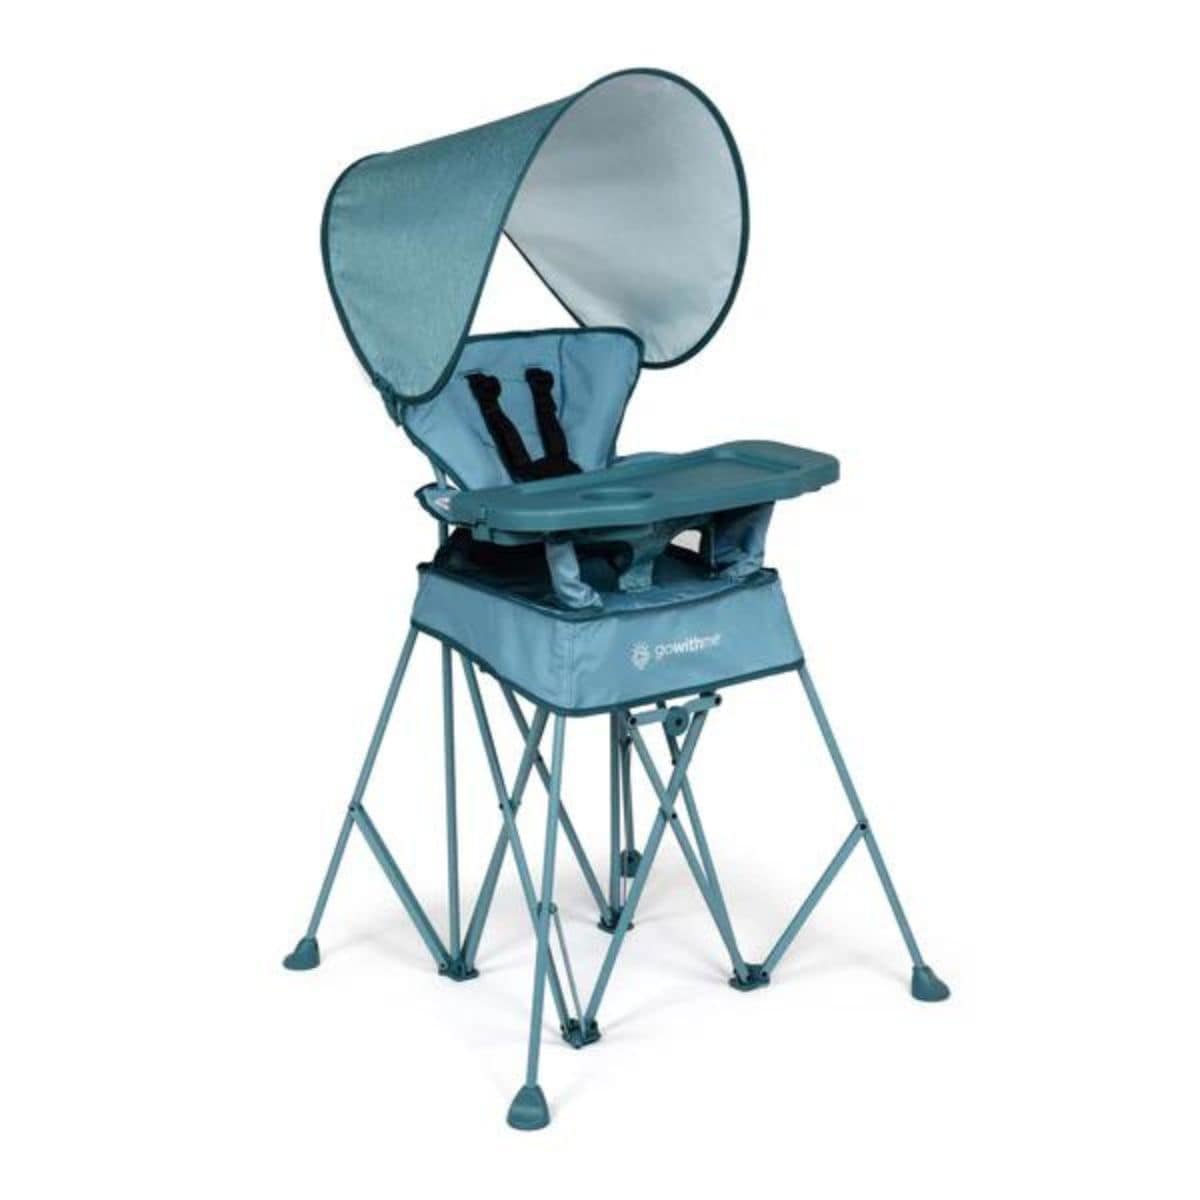 Go With Me Uplift Deluxe Portable High Chair with Canopy, 819956001616 - ANB Baby